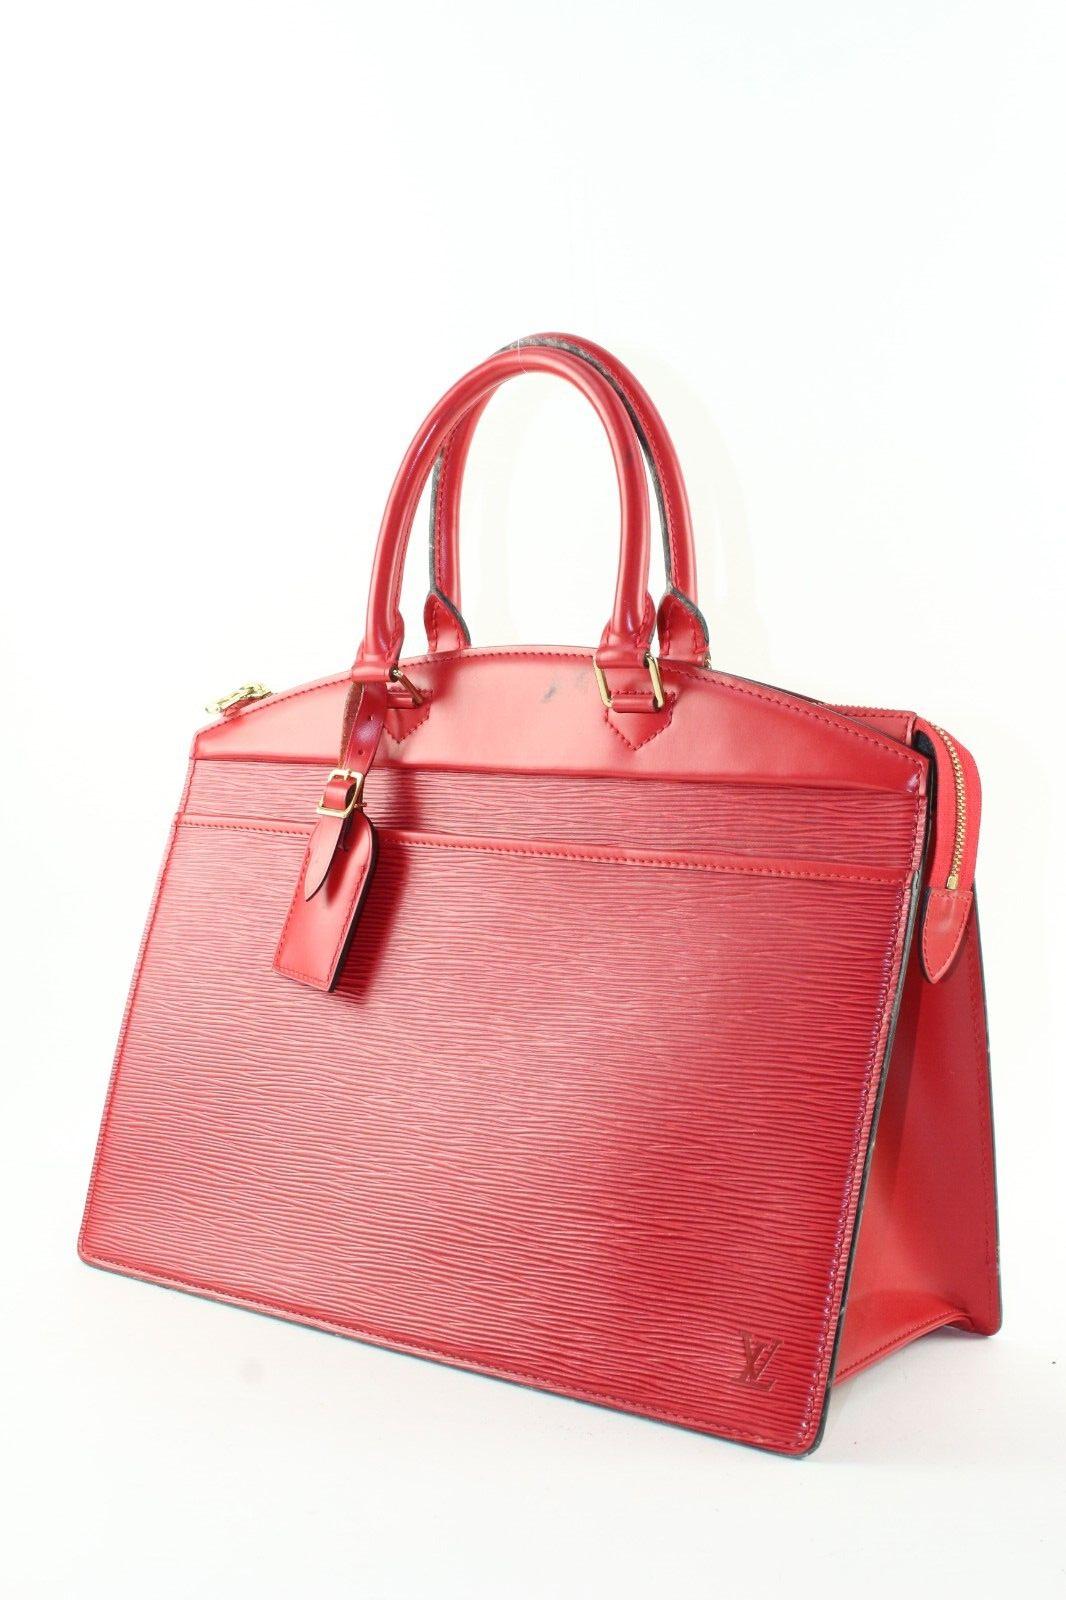 Louis Vuitton Riviera Top Handle Red Leather Monogram Epi 4LV1212K In Fair Condition For Sale In Dix hills, NY